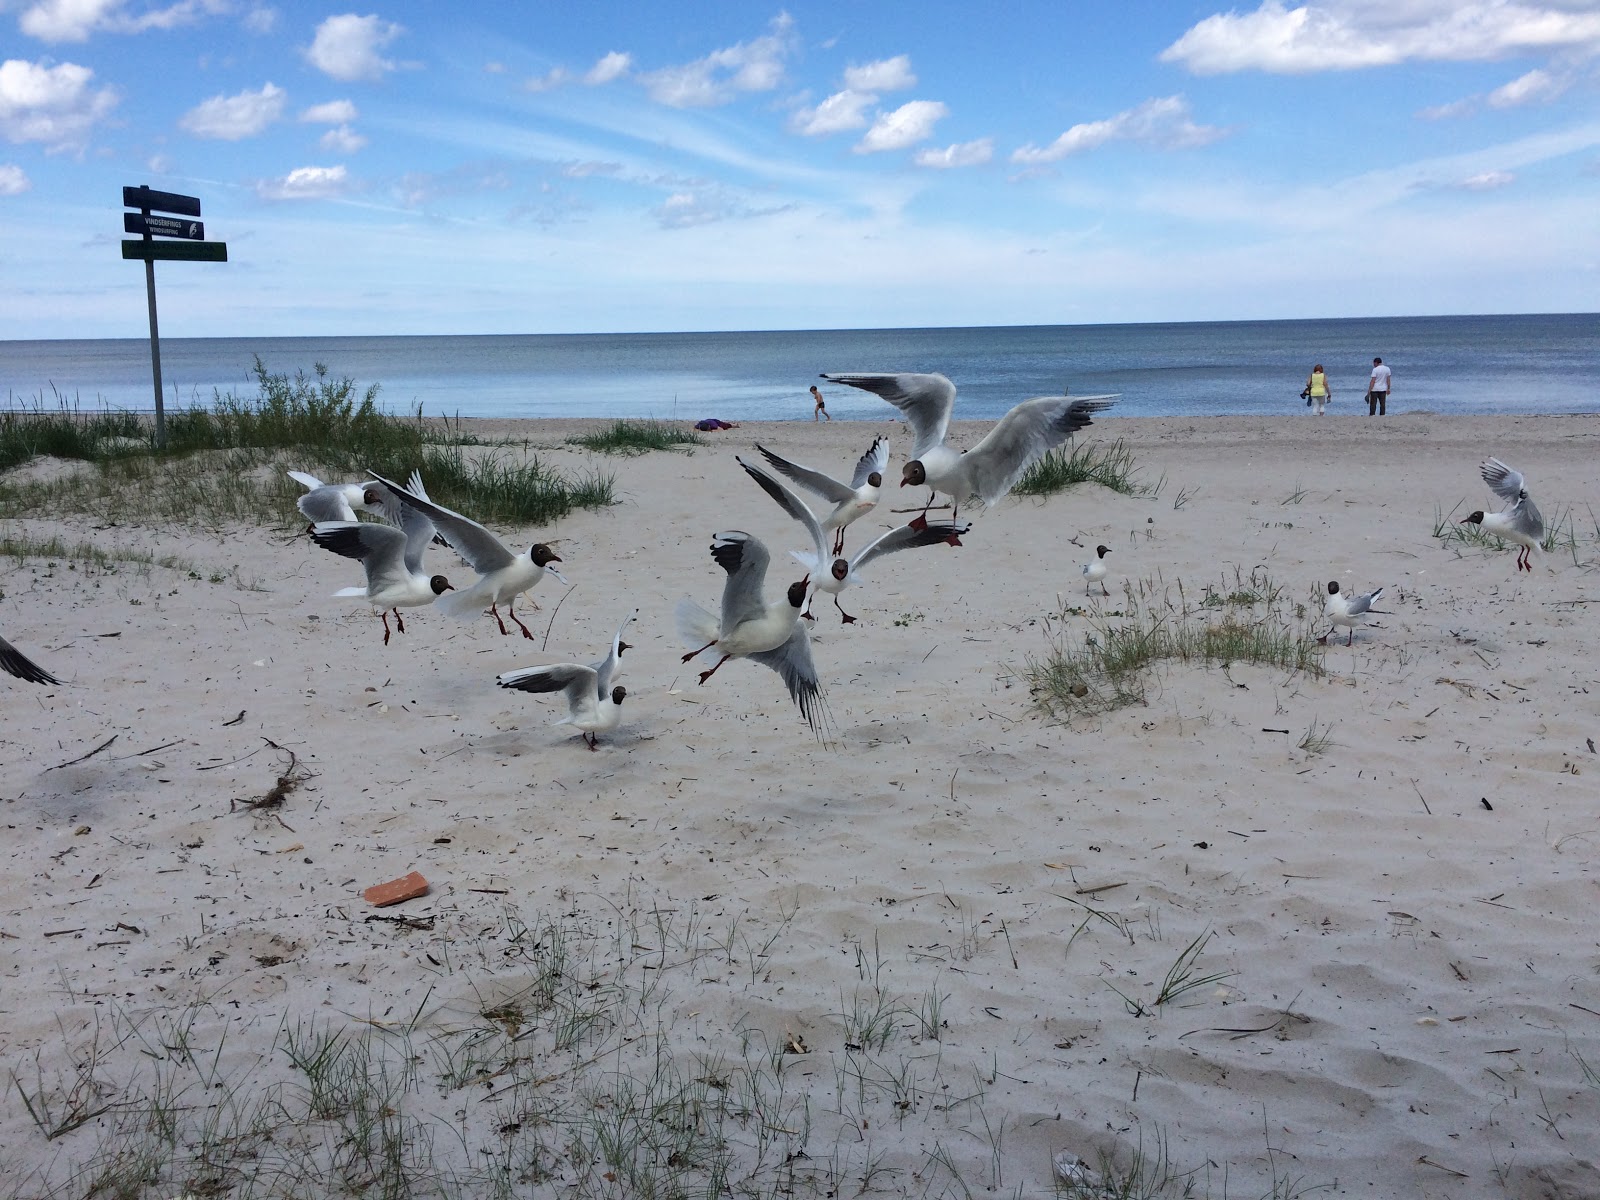 The gulls got the fatty parts of our smoked pork. This beach is a few miles west of Jurmala.